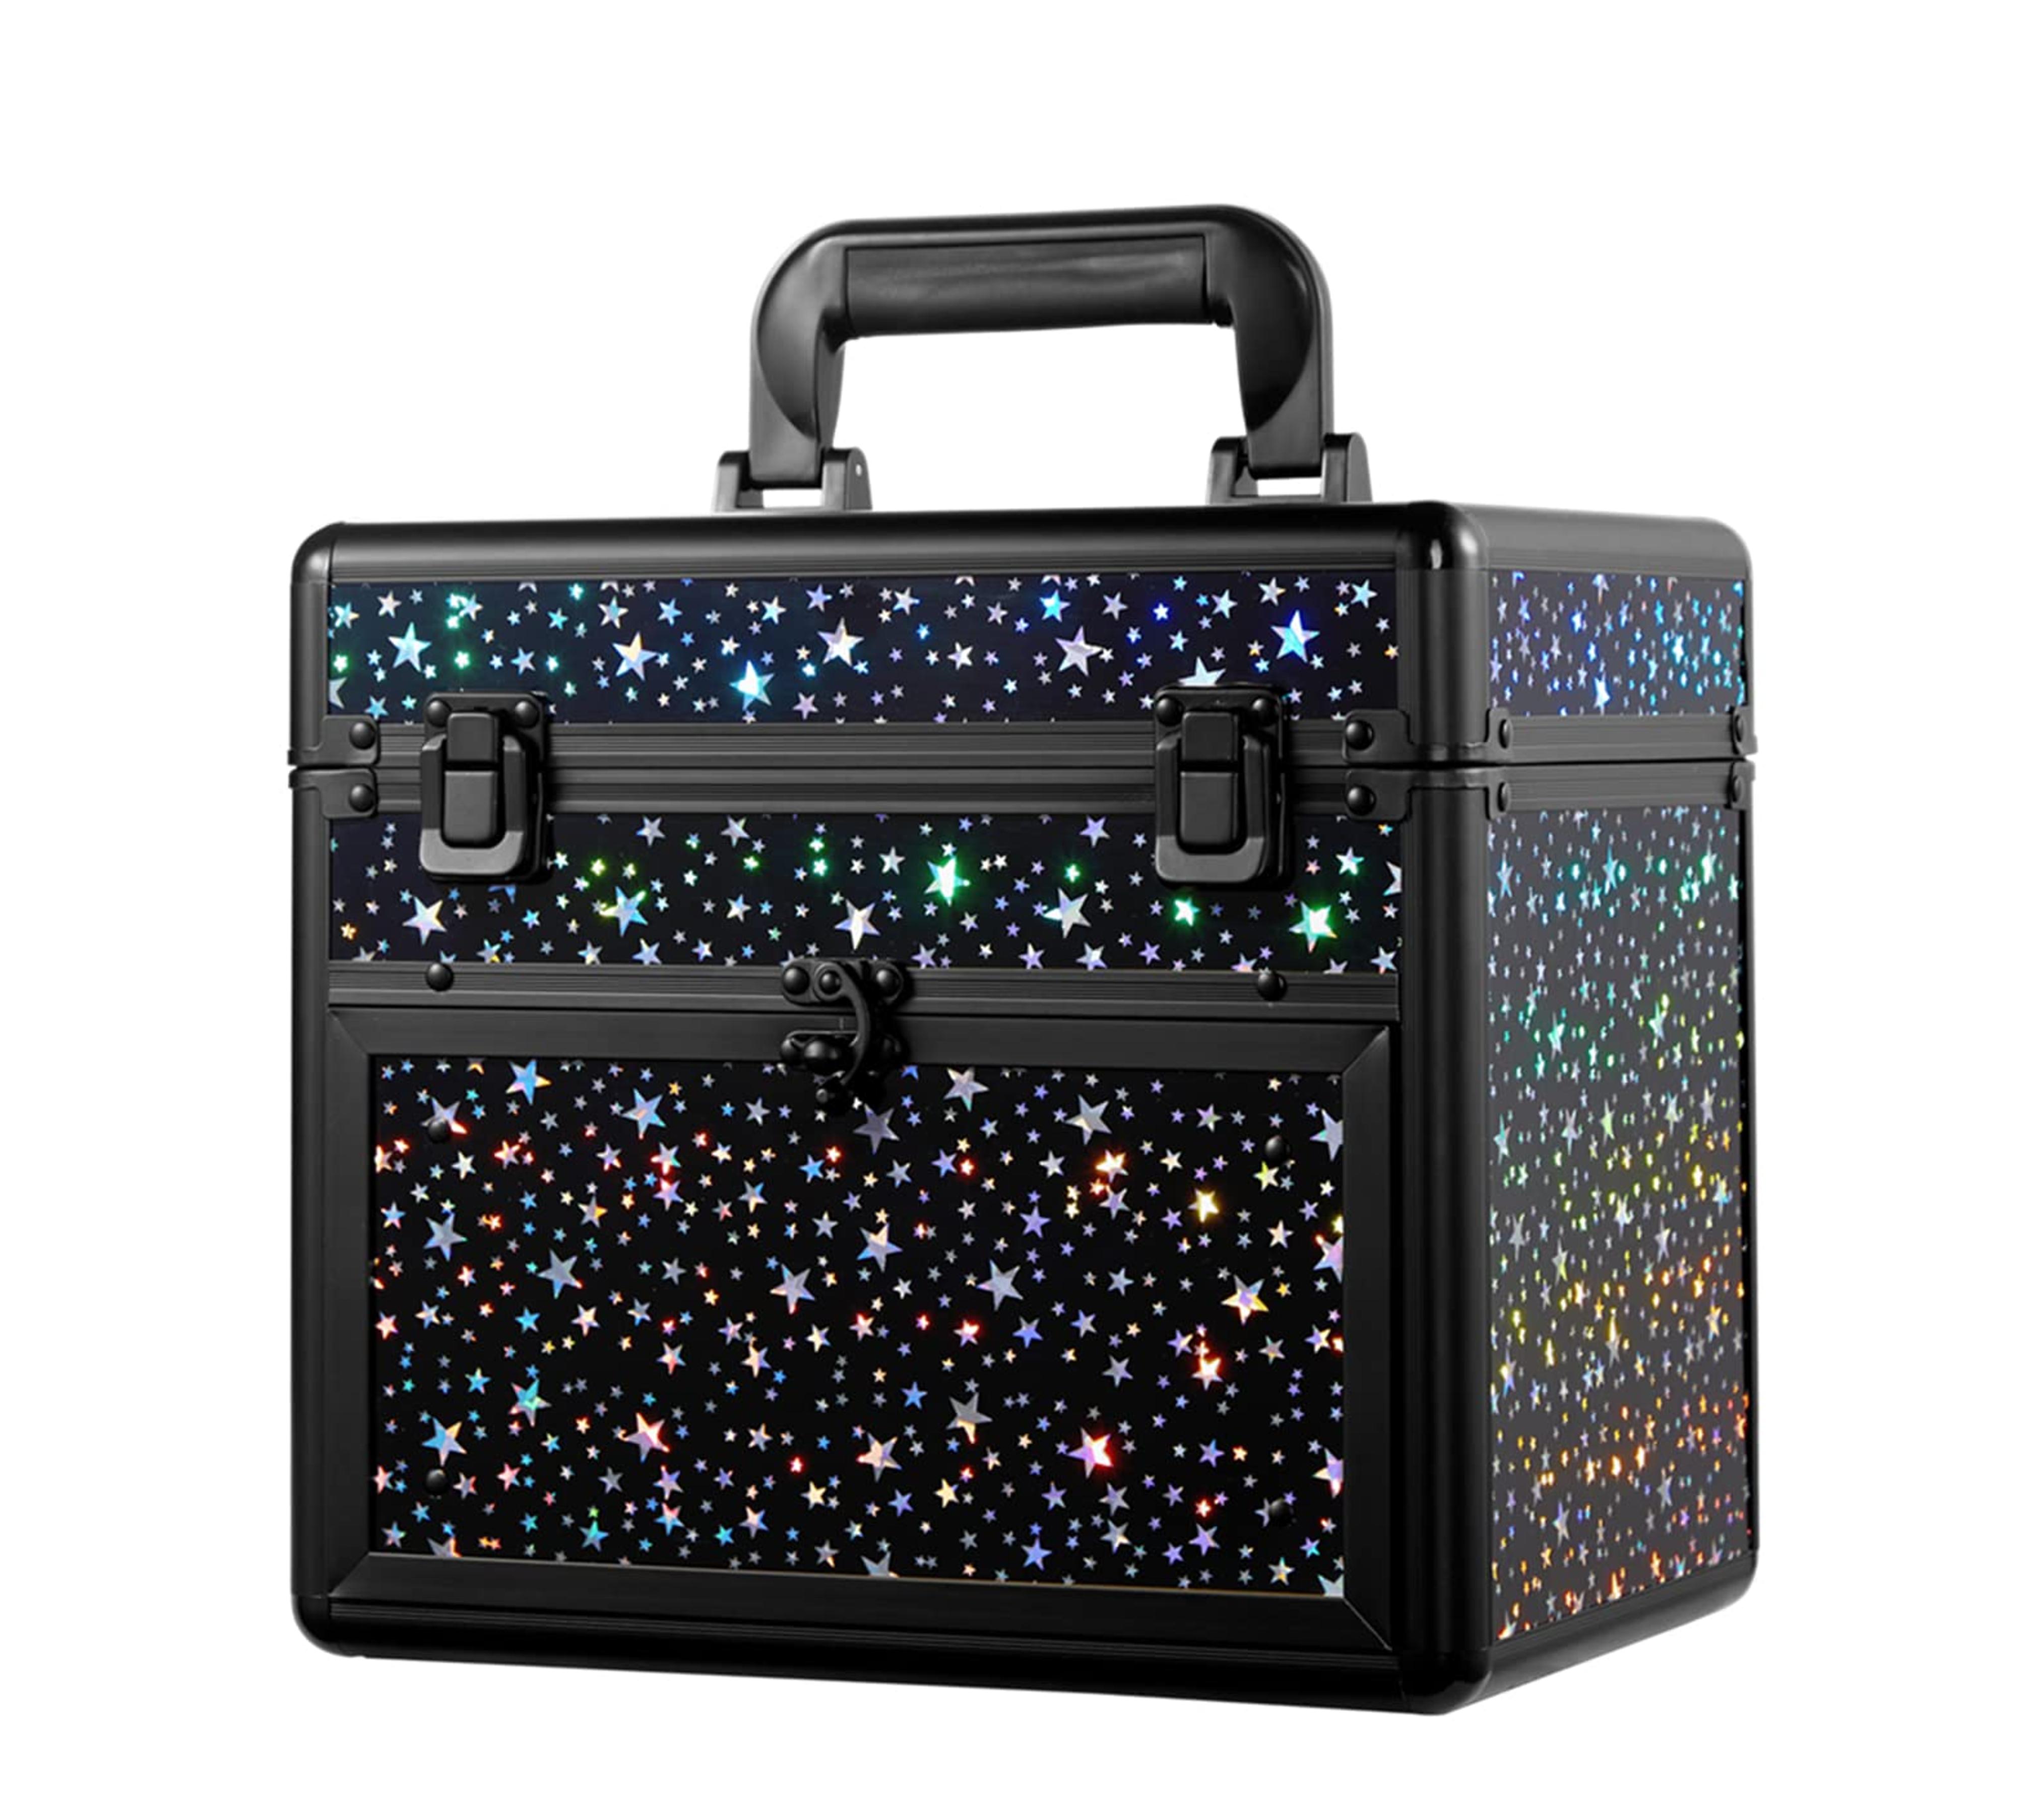 Train Case Nail Polish Case With Drawer and Dividers Makeup Travel Case Portable Cosmetic Organizer (black with shiny star)